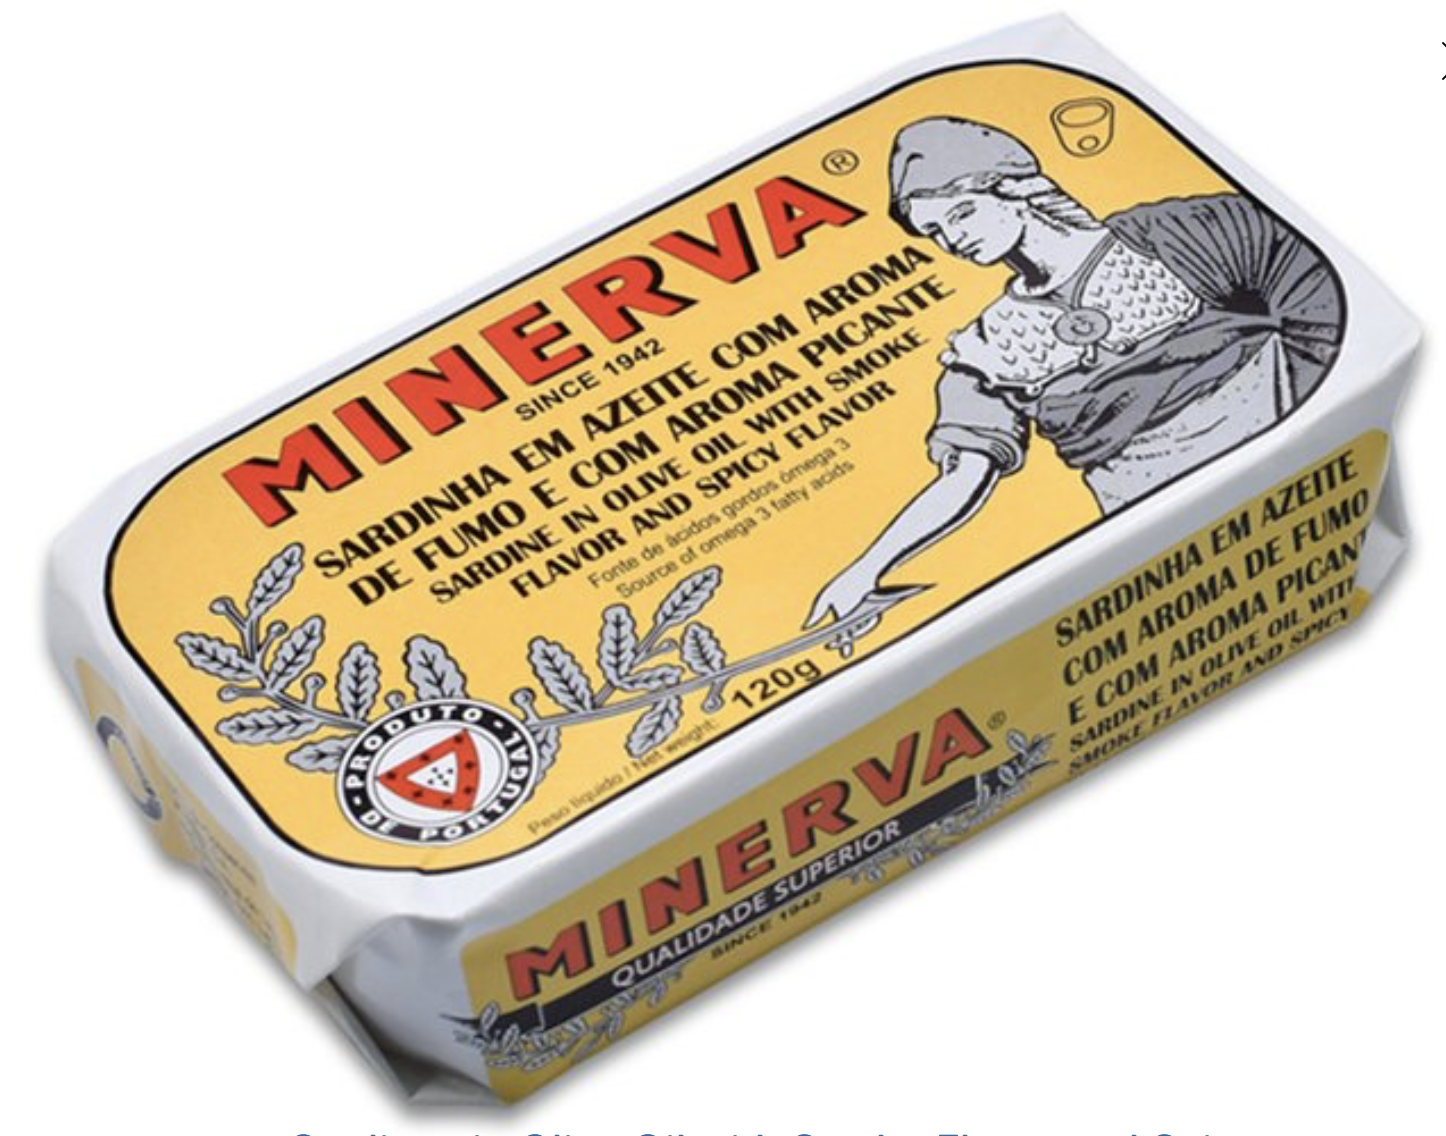 Minerva Spiced Smoked Sardines in Olive Oil